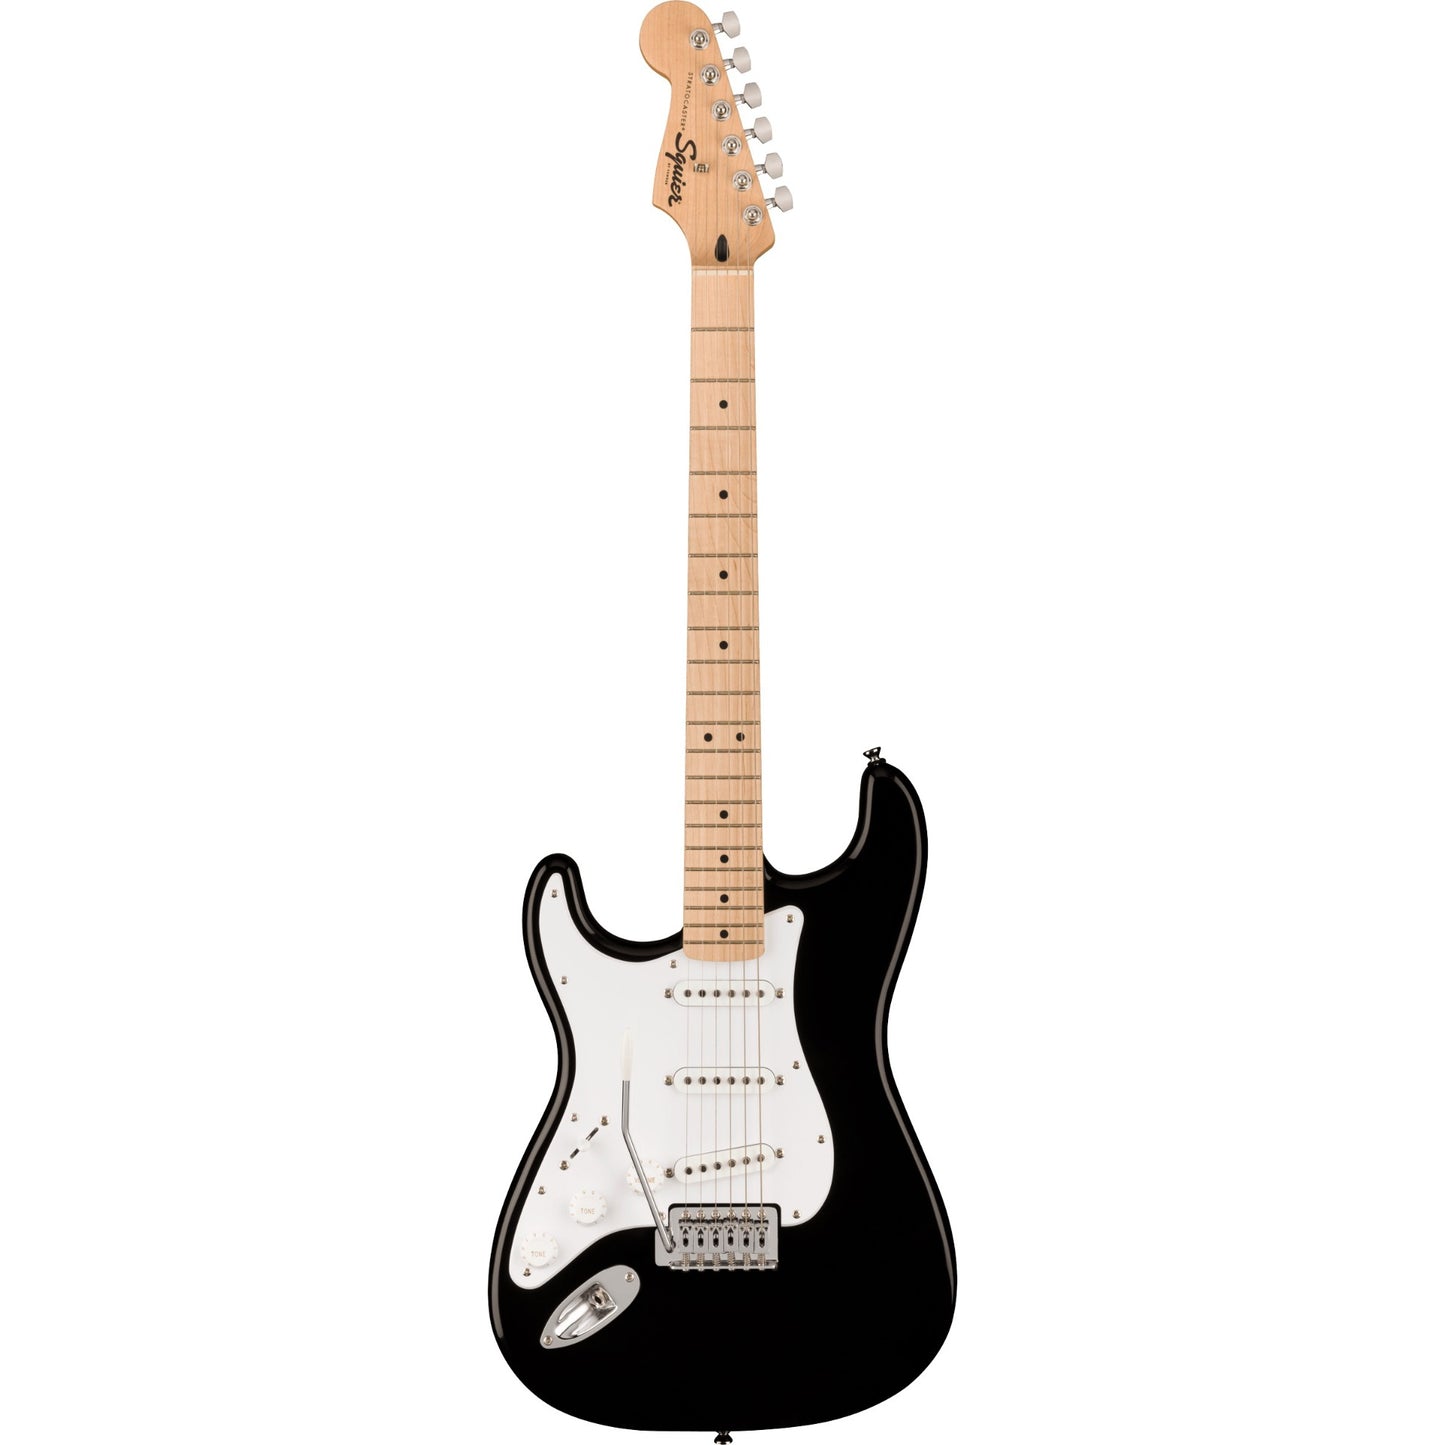 Squier Sonic Stratocaster Left-Handed Electric Guitar - Black